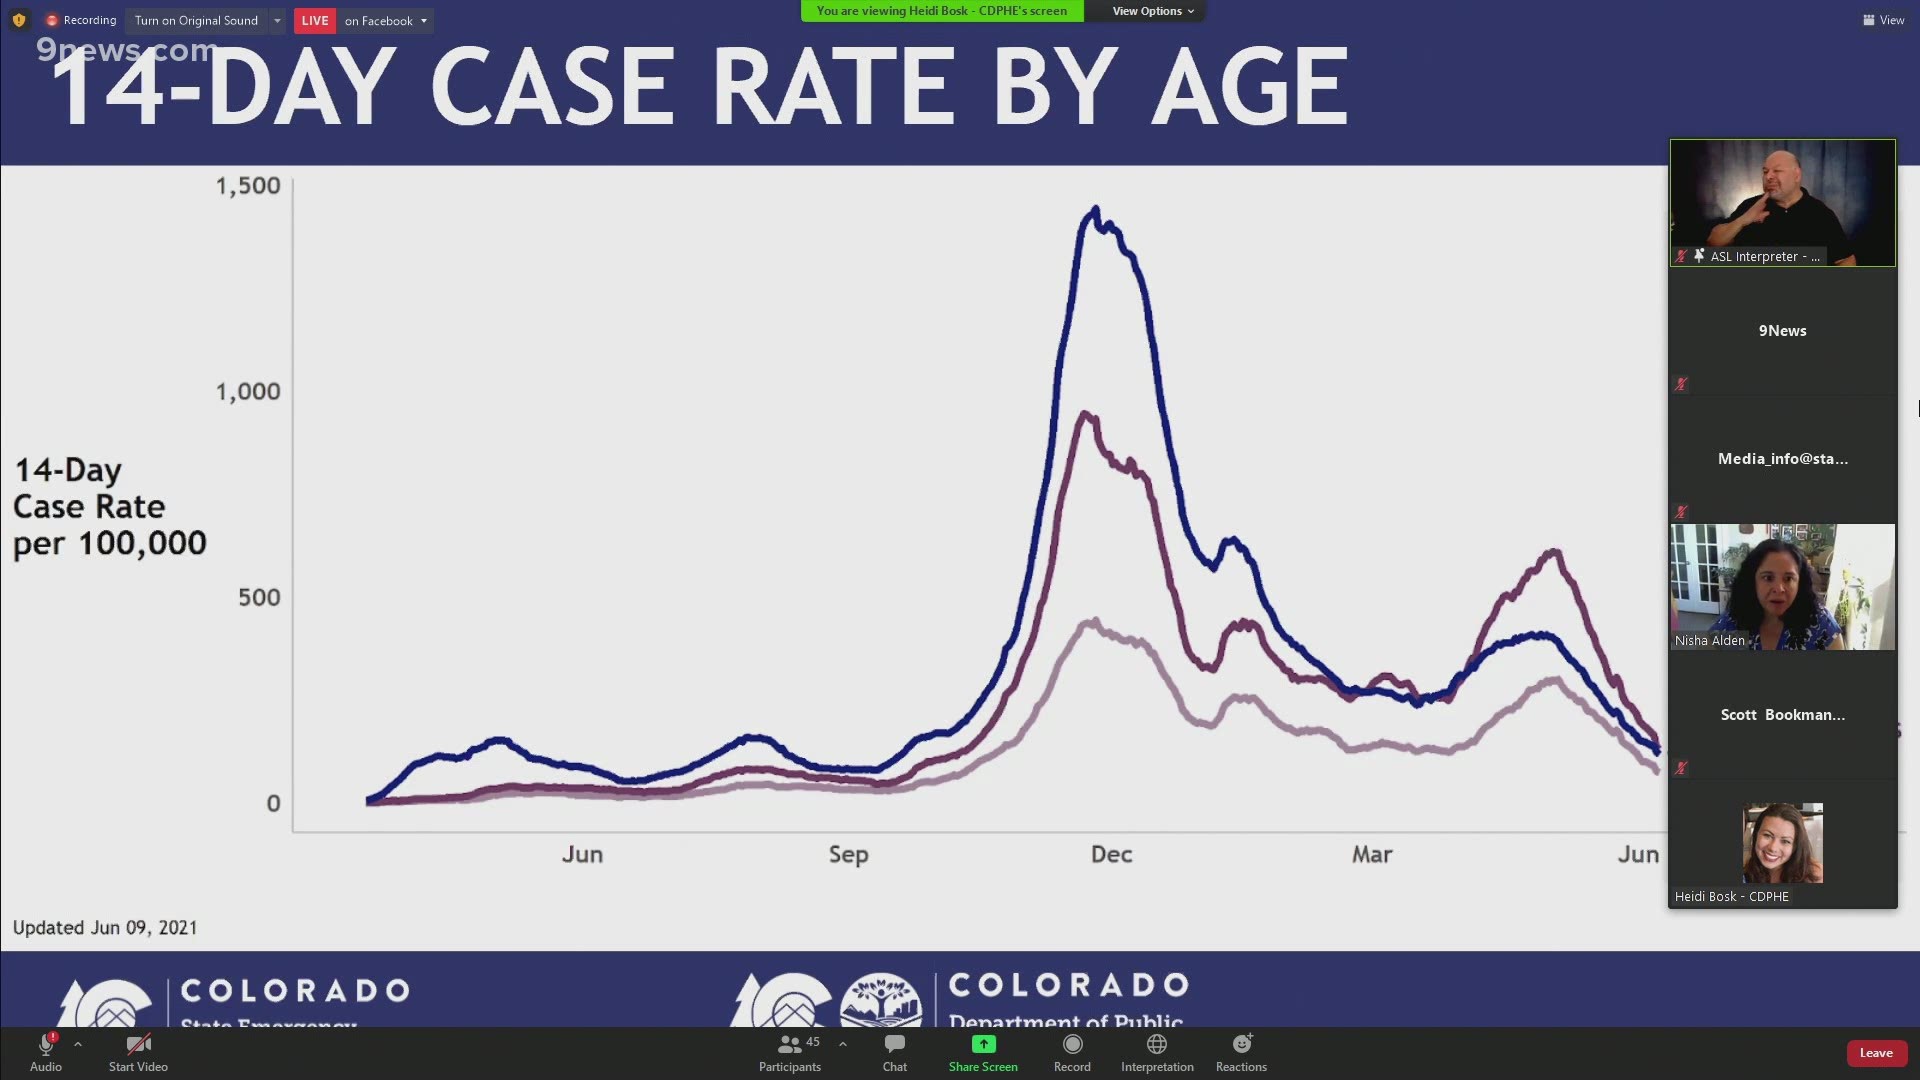 Colorado Department of Public Health and Environment officials spoke Wednesday as cases and hospitalizations continue to decline in the state.